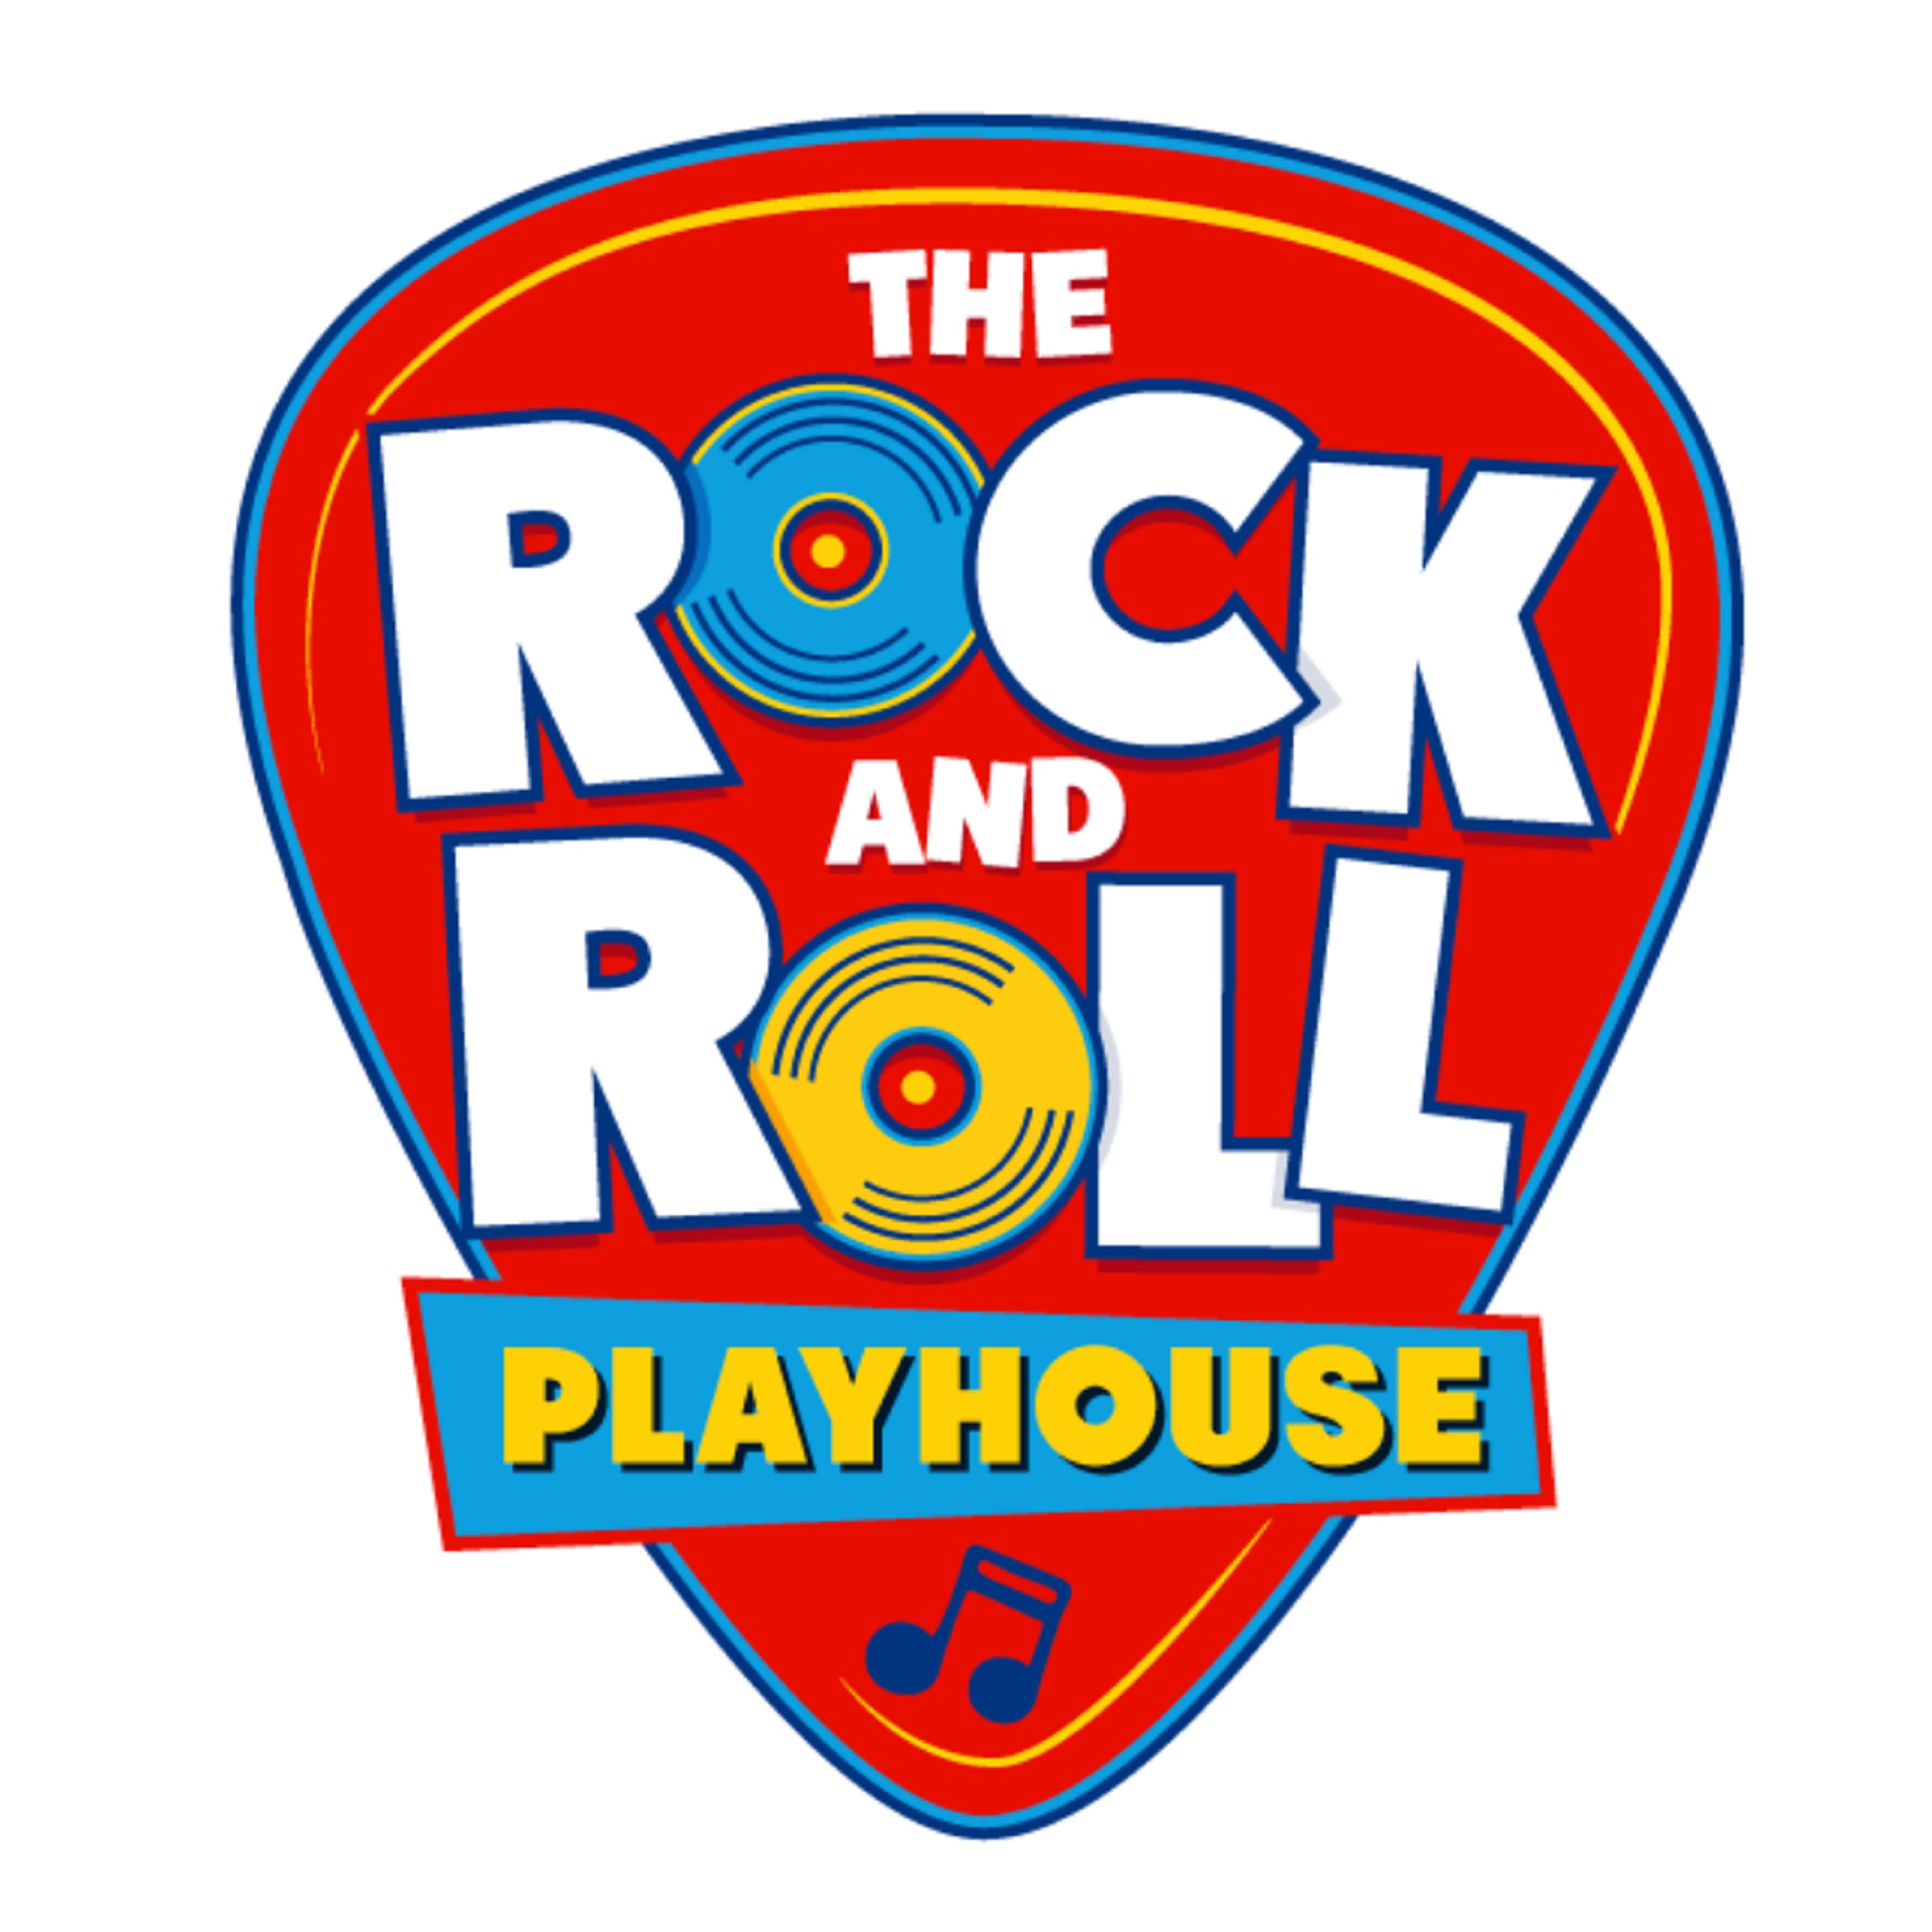 The Rock And Roll Playhouse Announces Halloween Family Concert Series